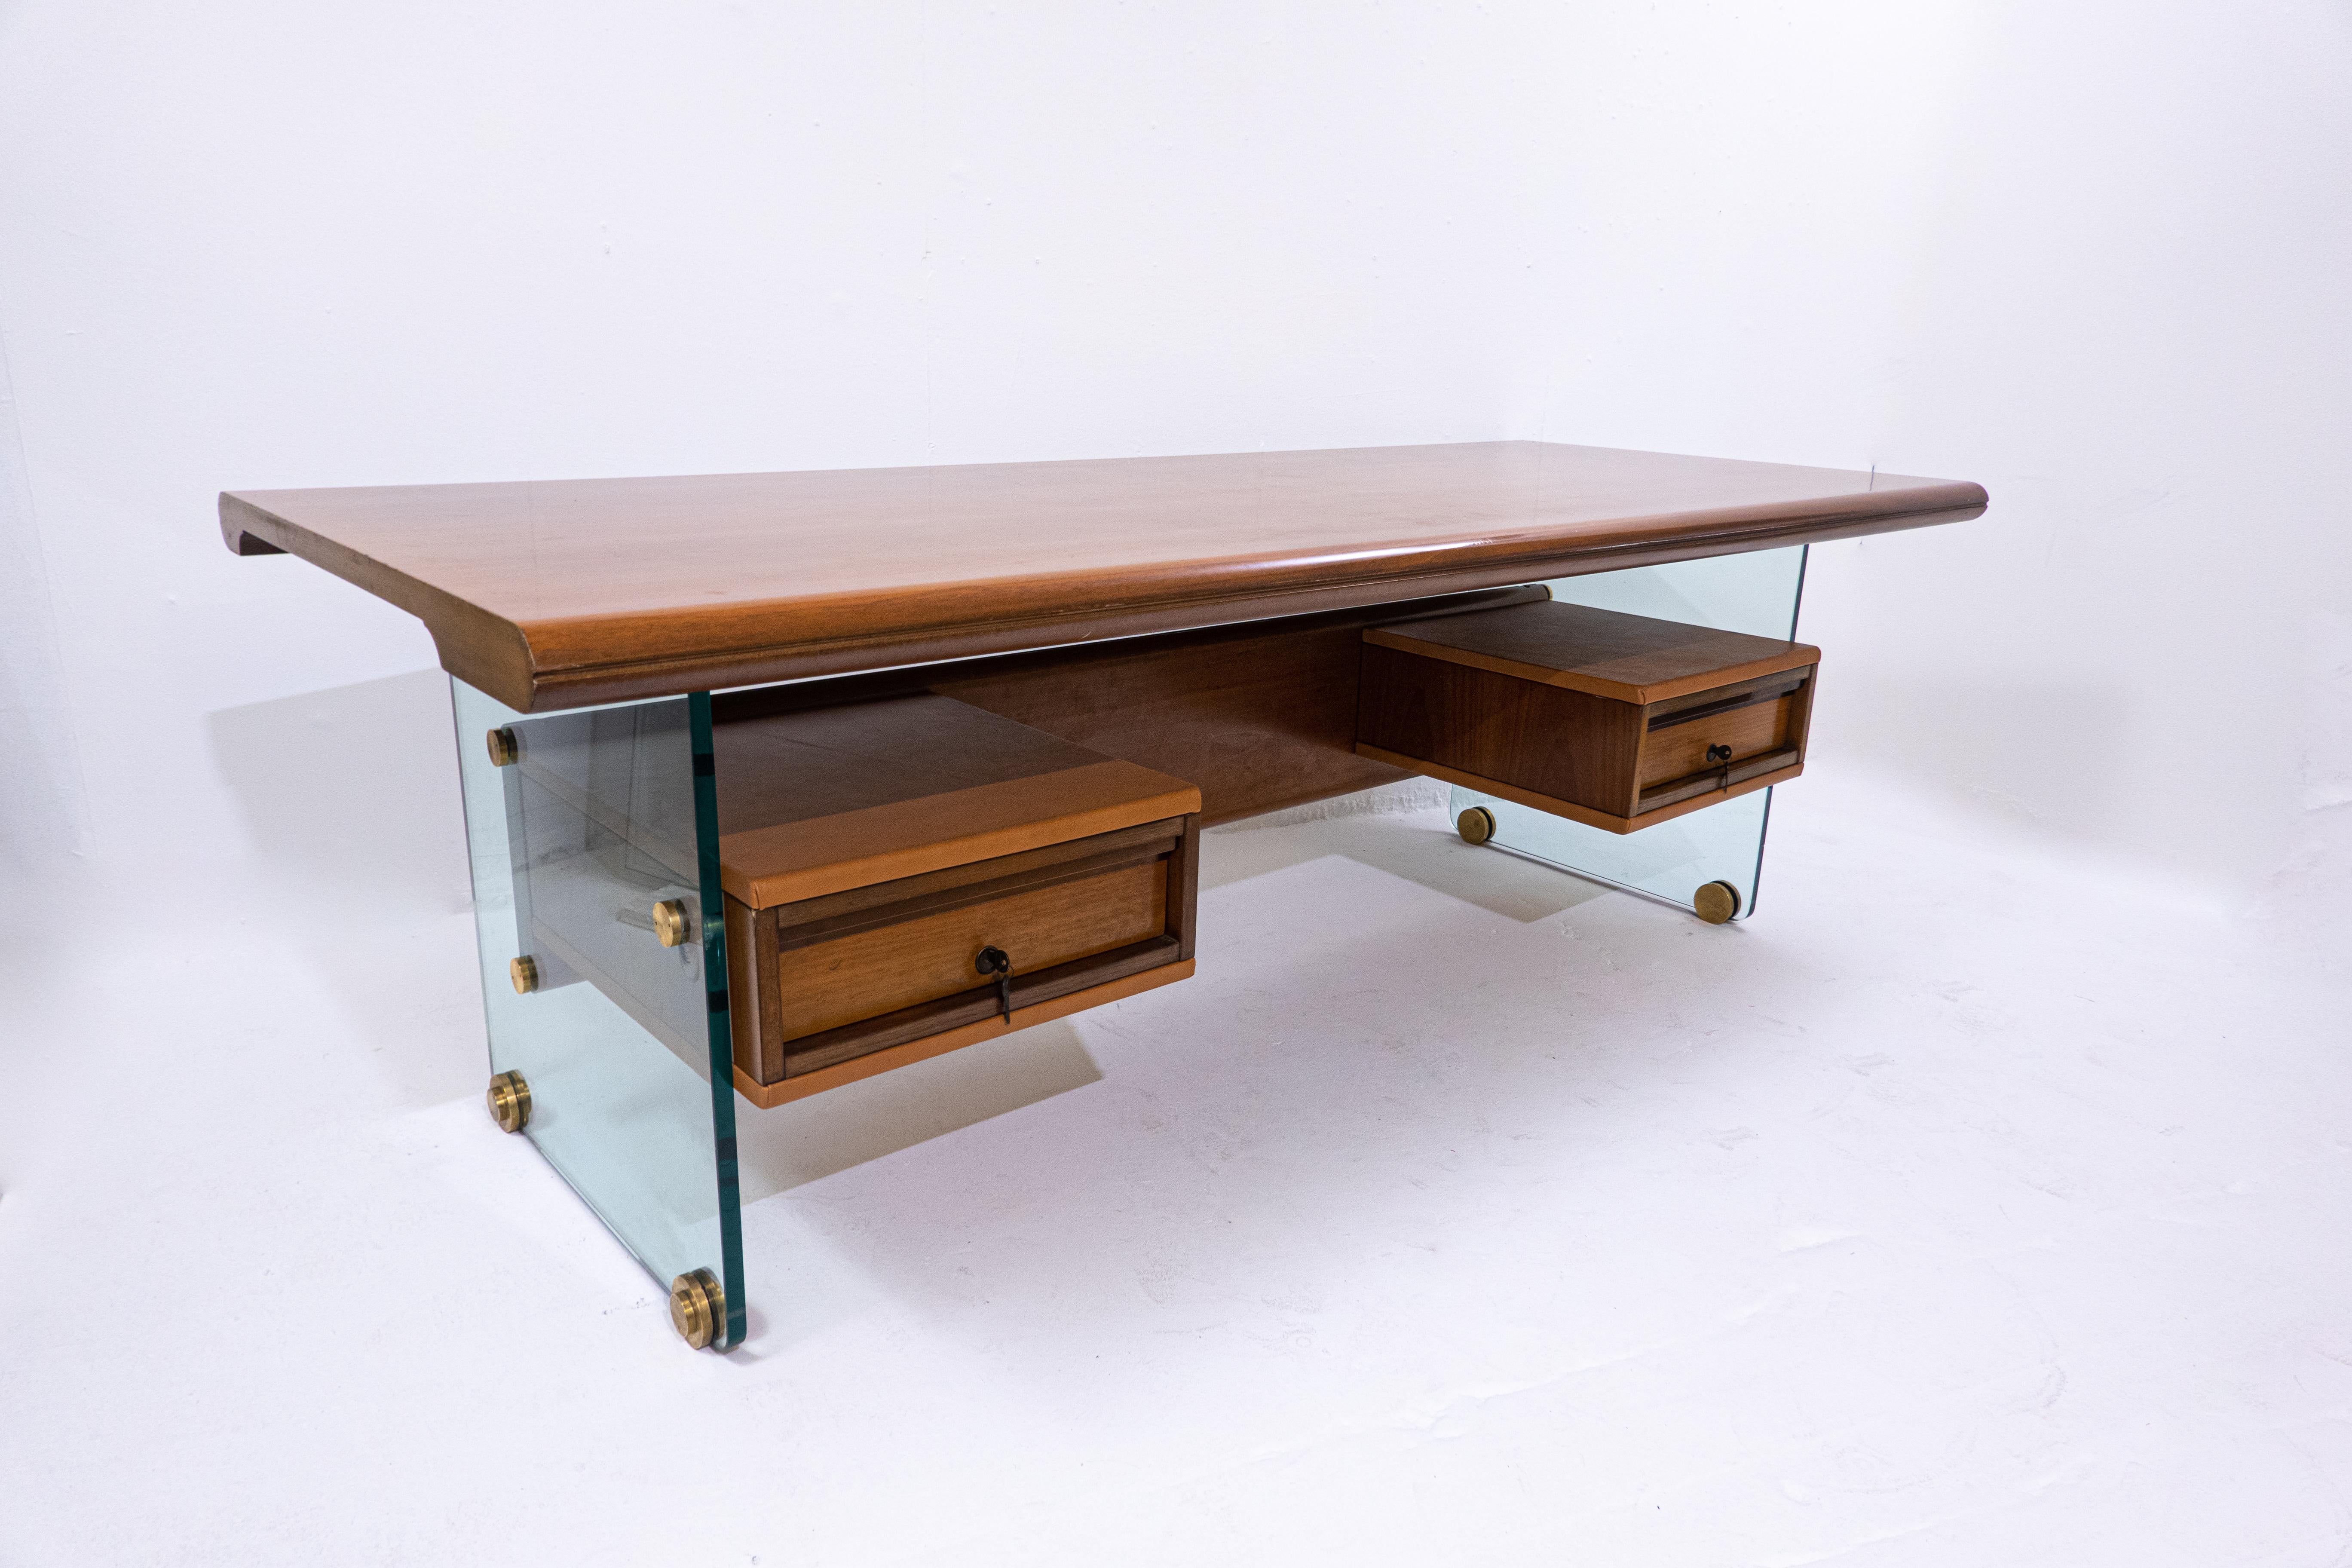 Mid-Century Modern desk by Tosi, glass wood leather and bronze, Italy, 1968.